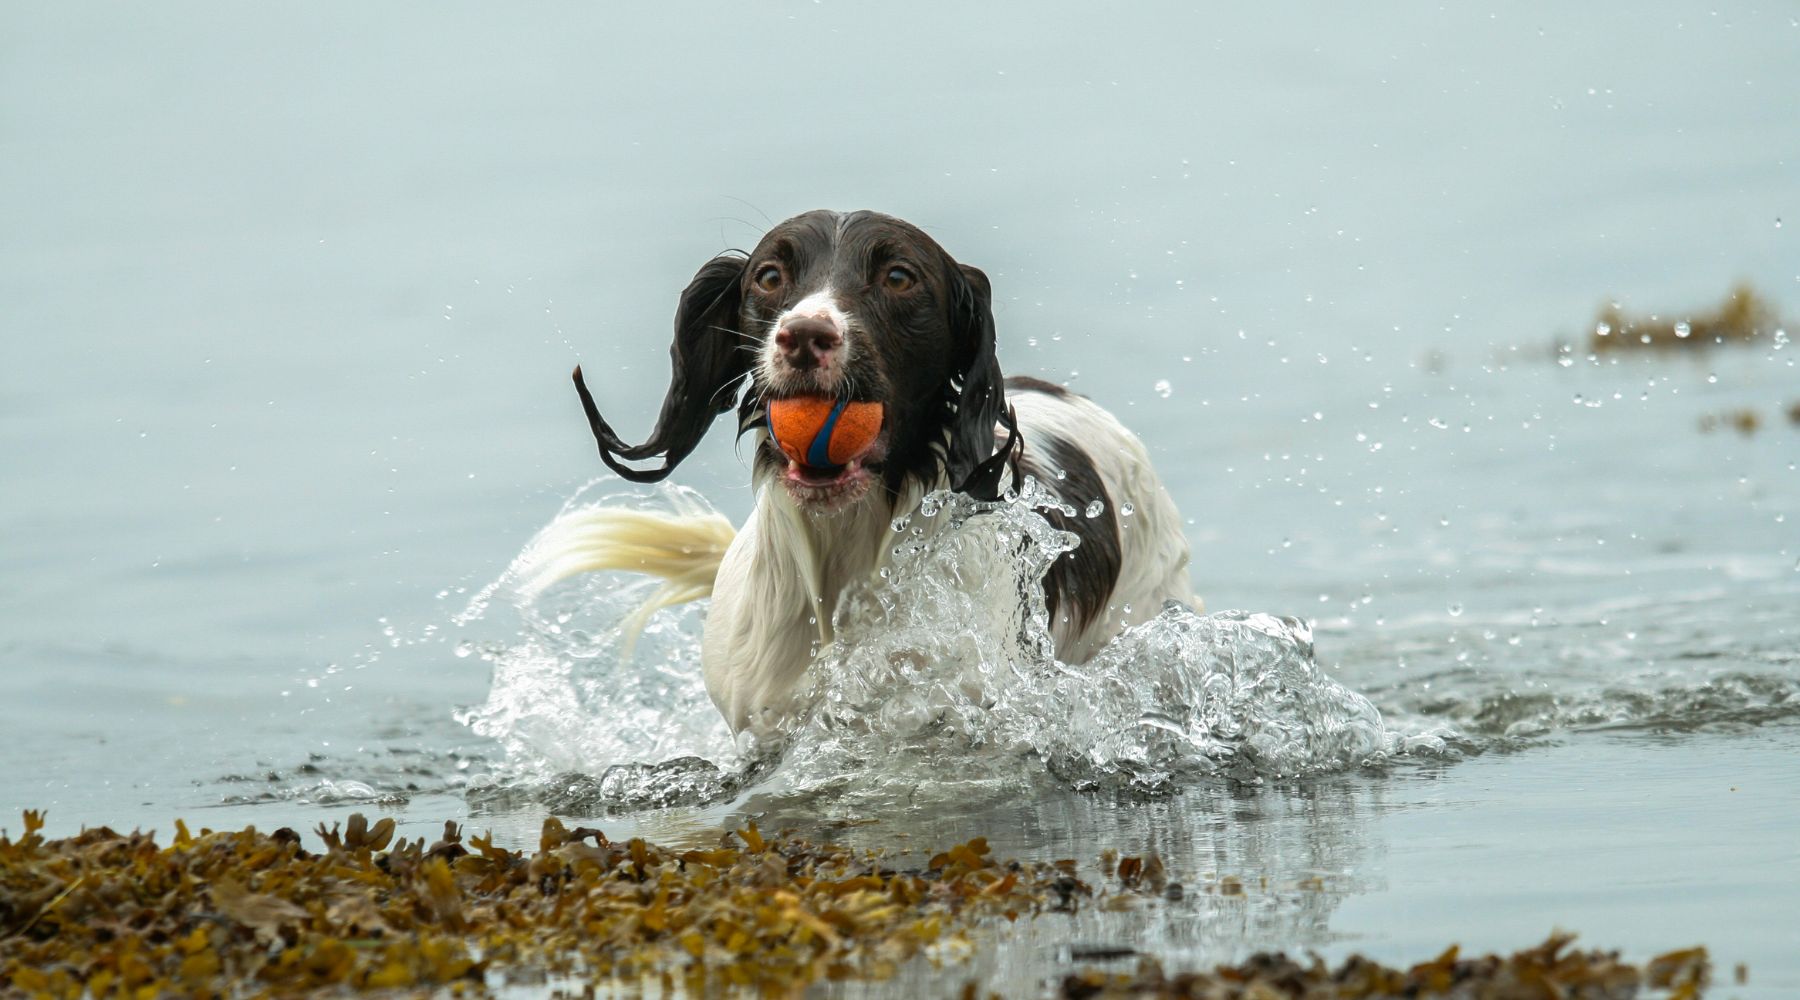 Wet spaniel in the water